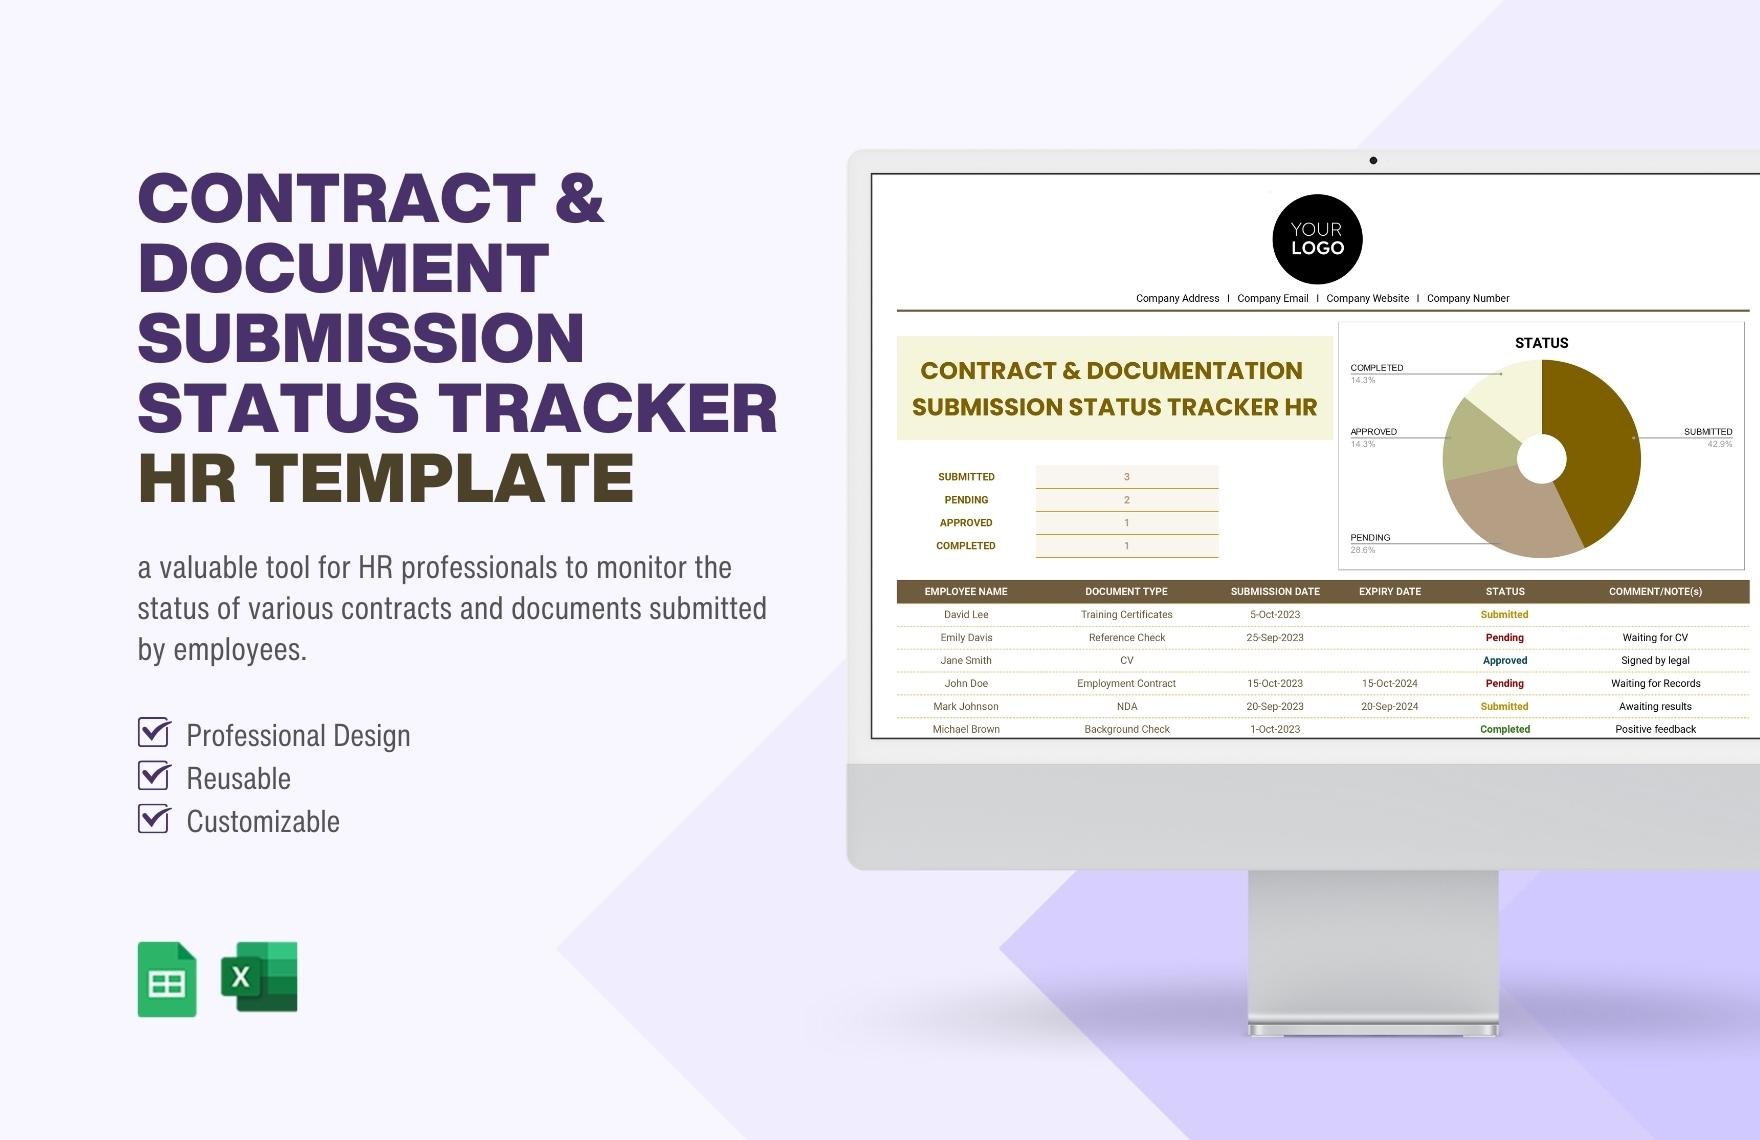 Contract & Document Submission Status Tracker HR Template